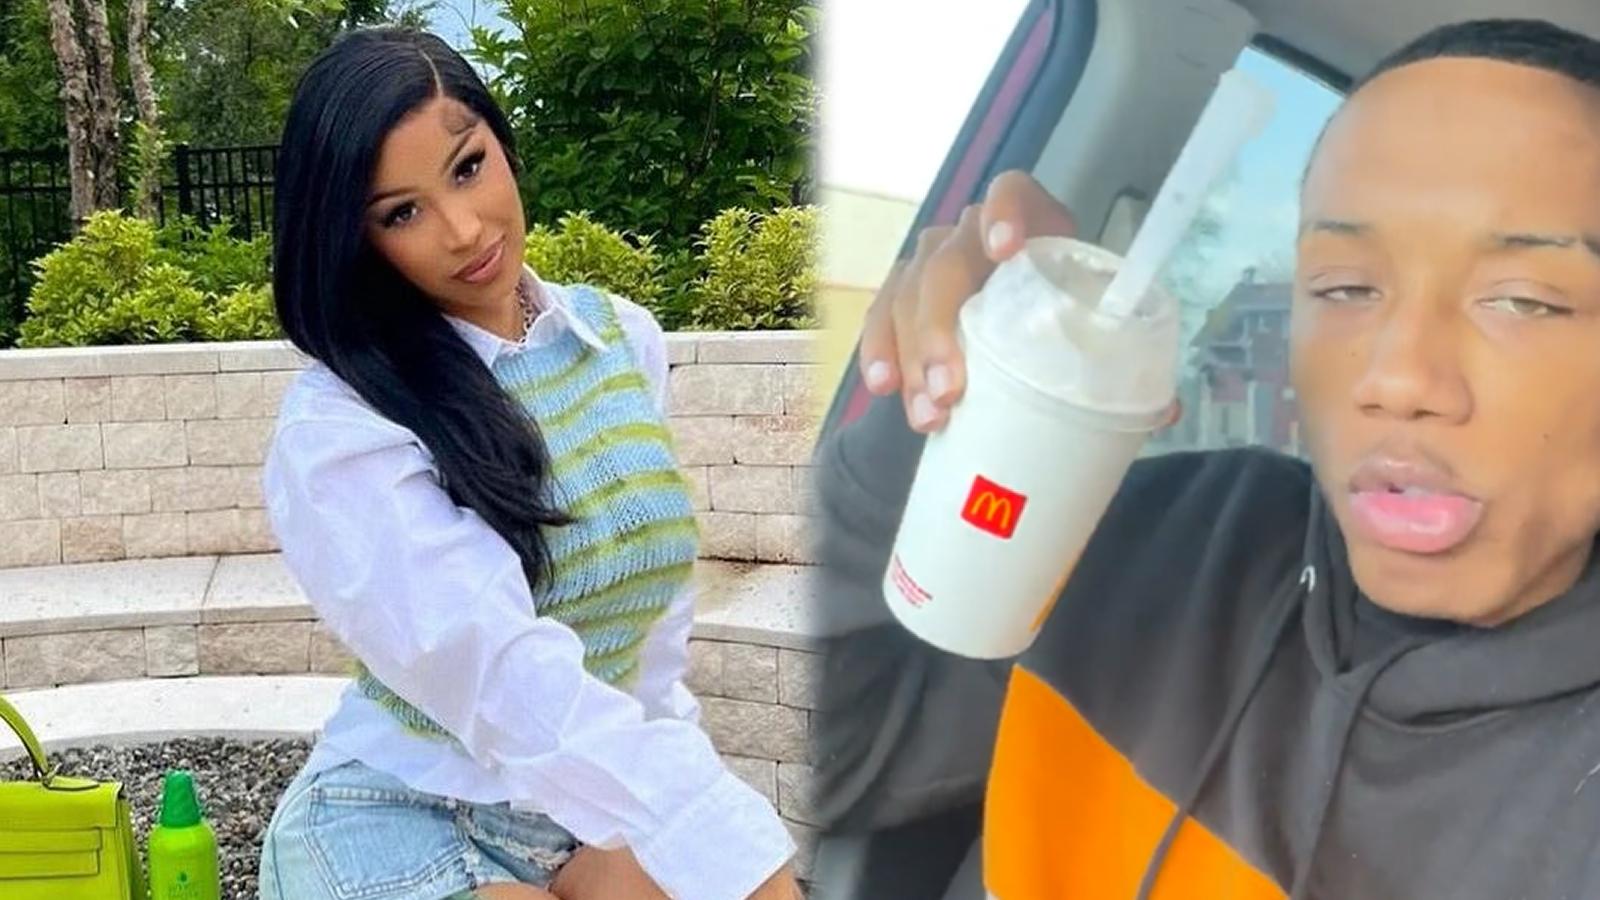 Cardi B on the left, and X user The Dump on the right.